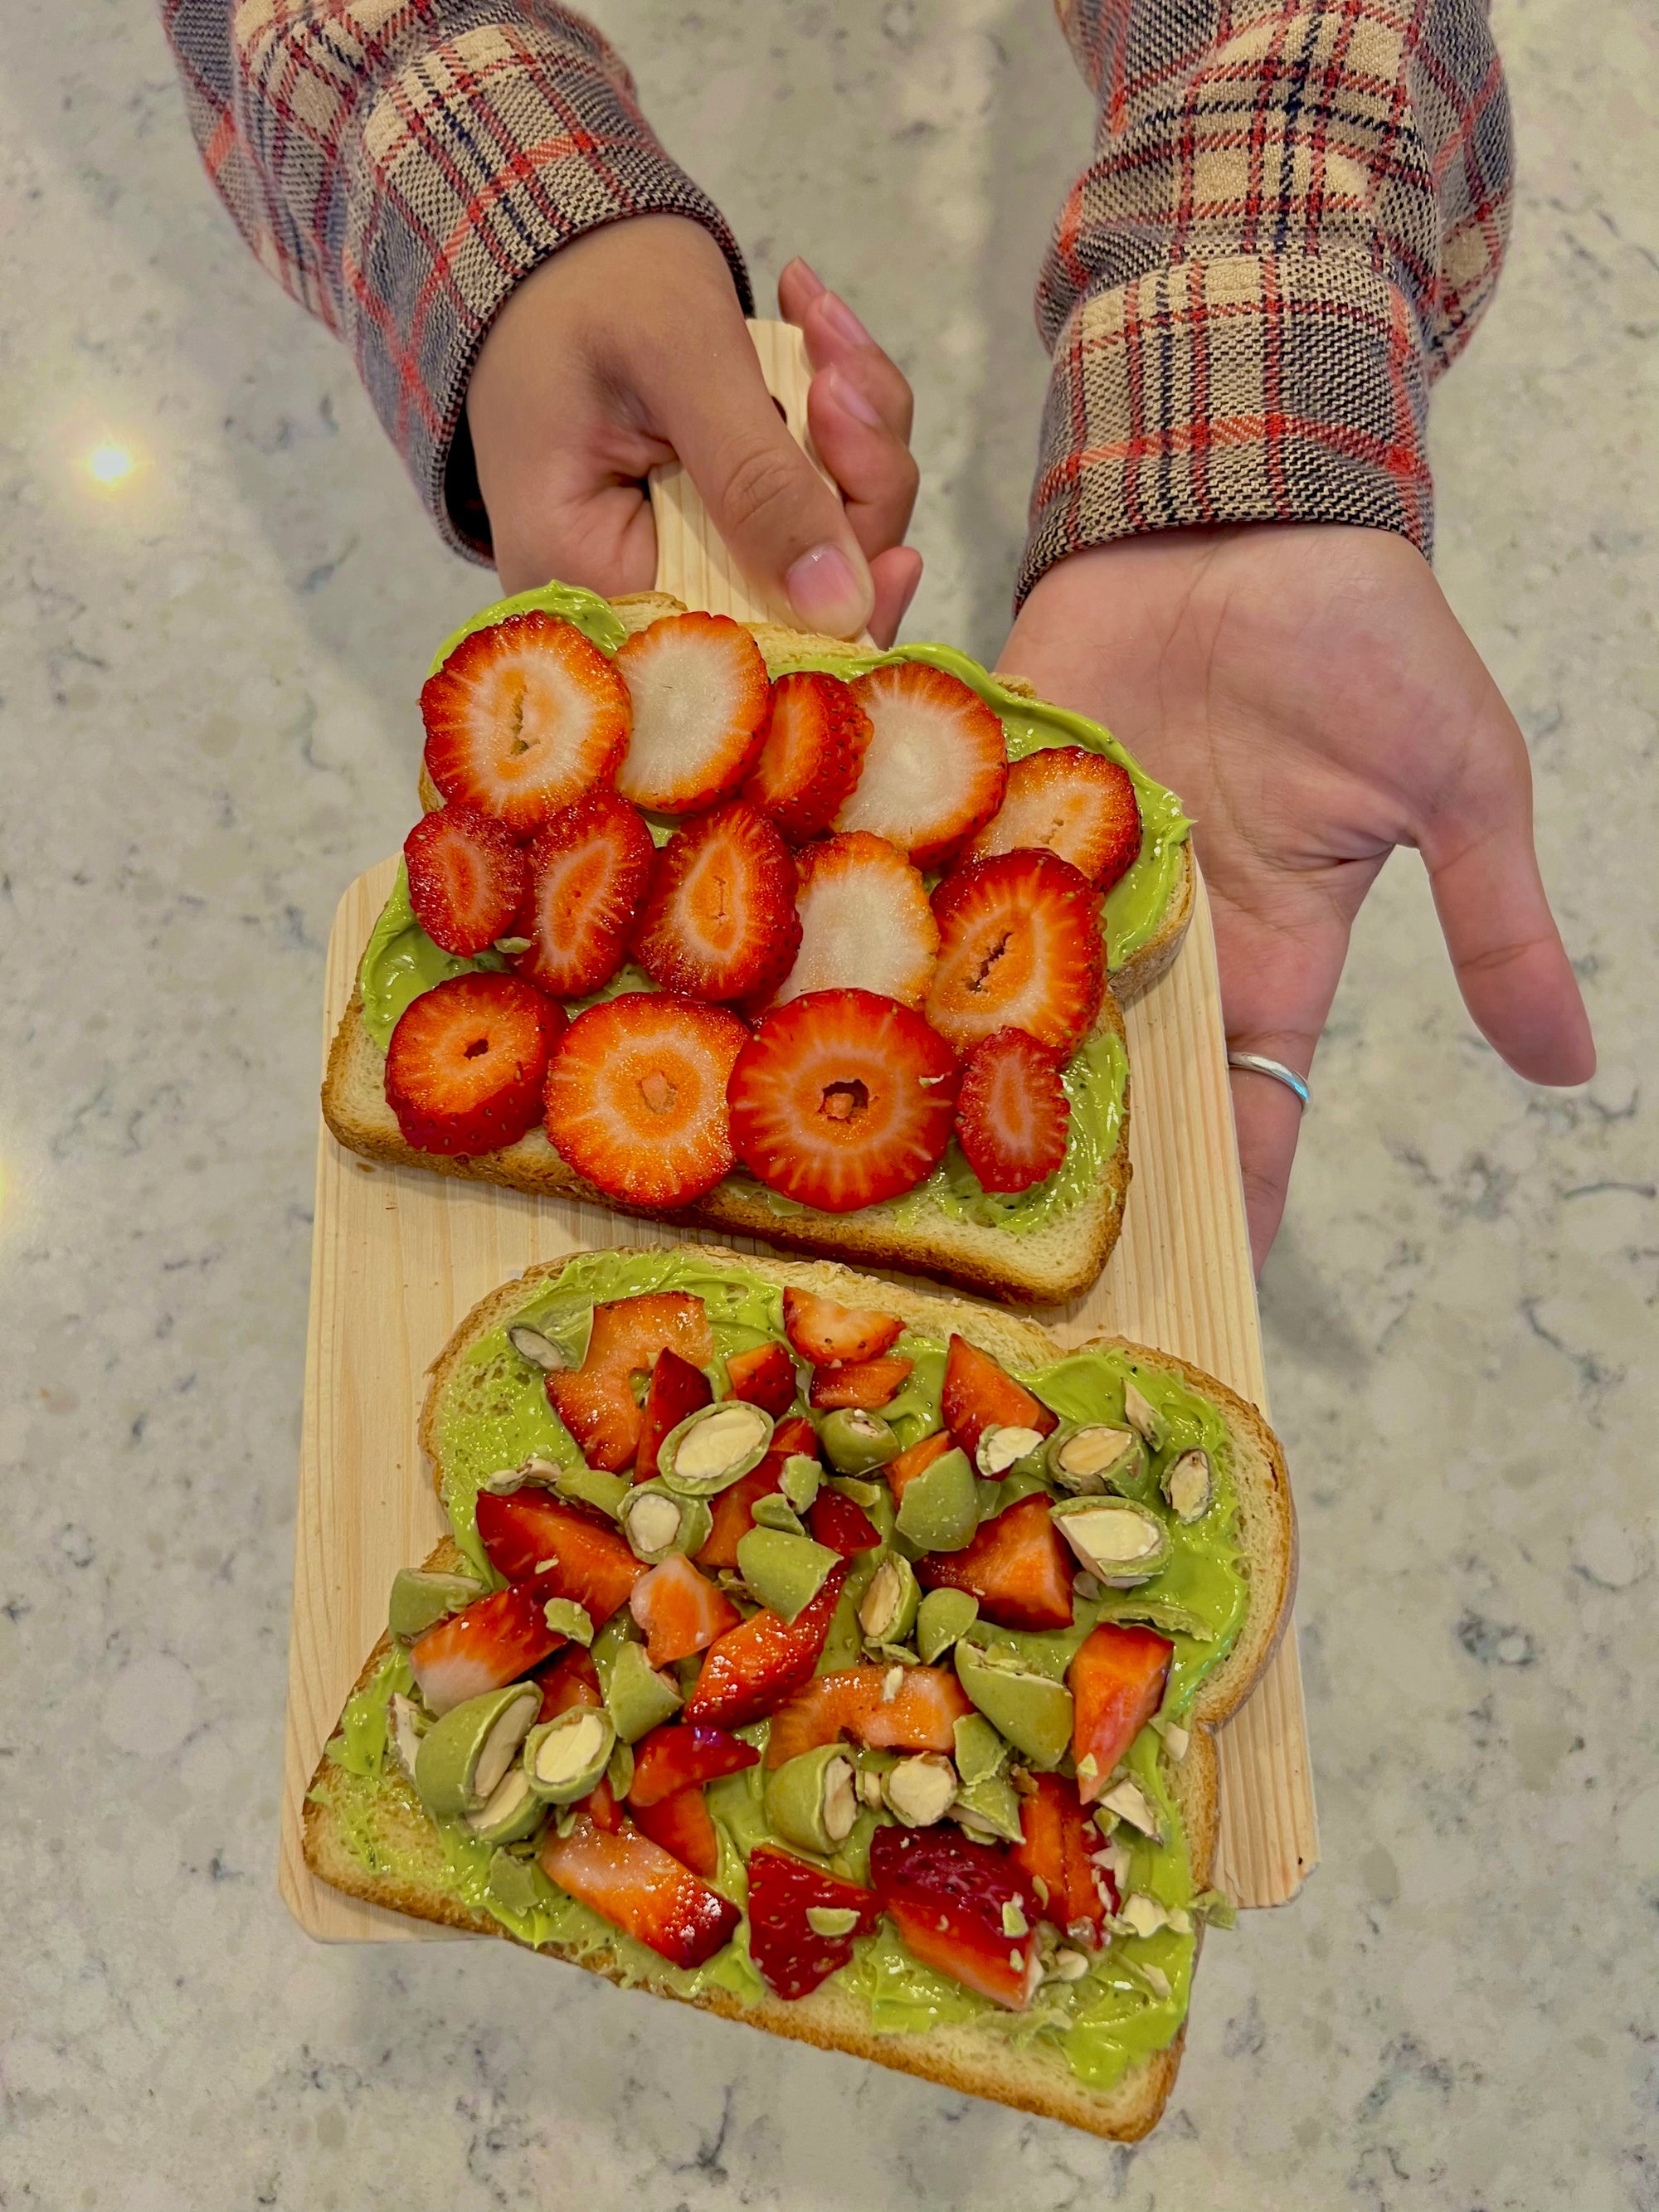 Hands presenting a wooden board with two slices of avocado toast topped with strawberries and seeds, over a marble surface